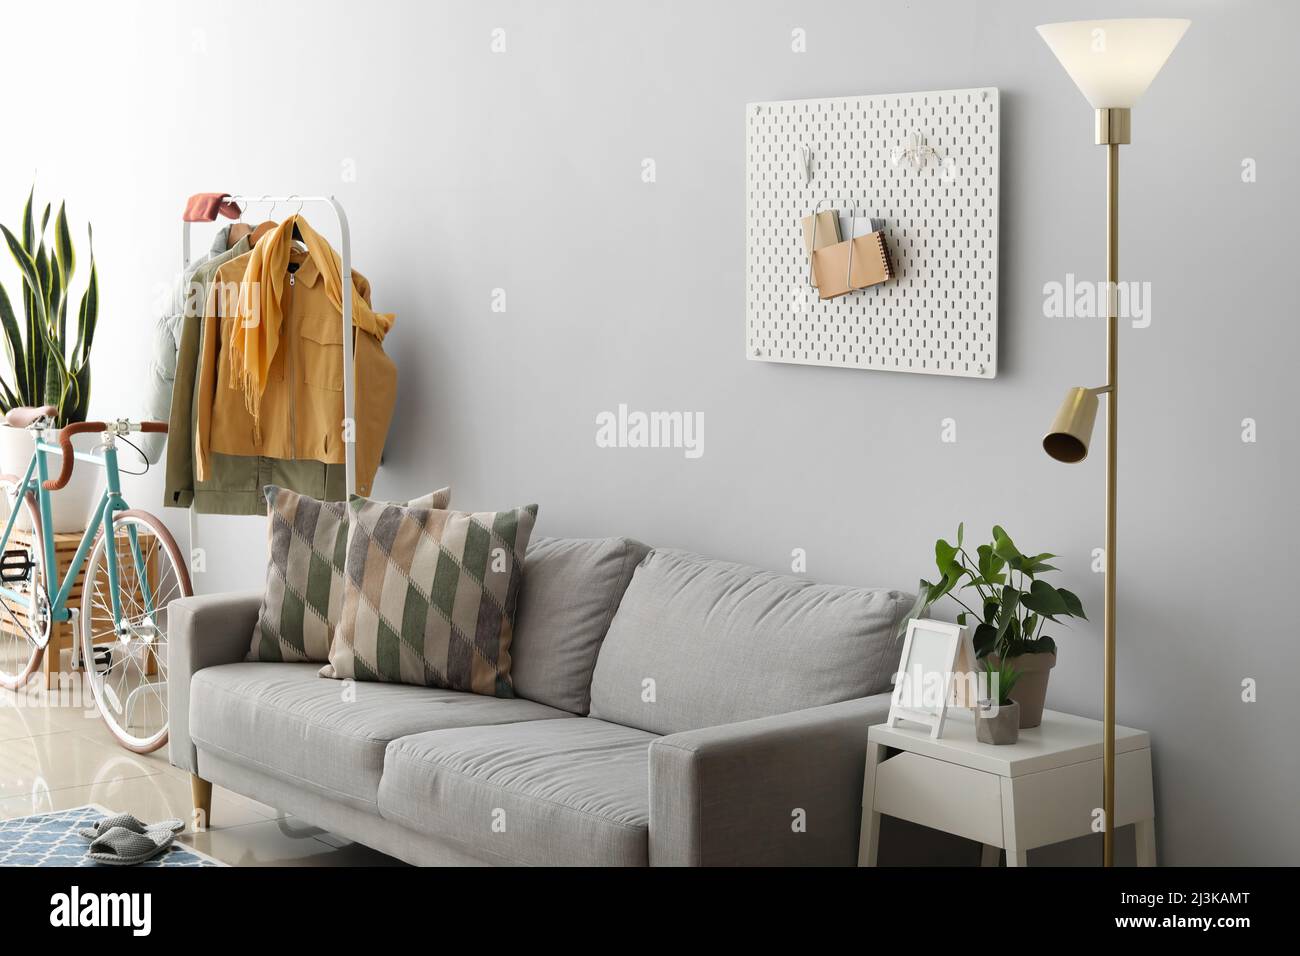 Interior of light living room with sofa, jackets and bicycle Stock Photo